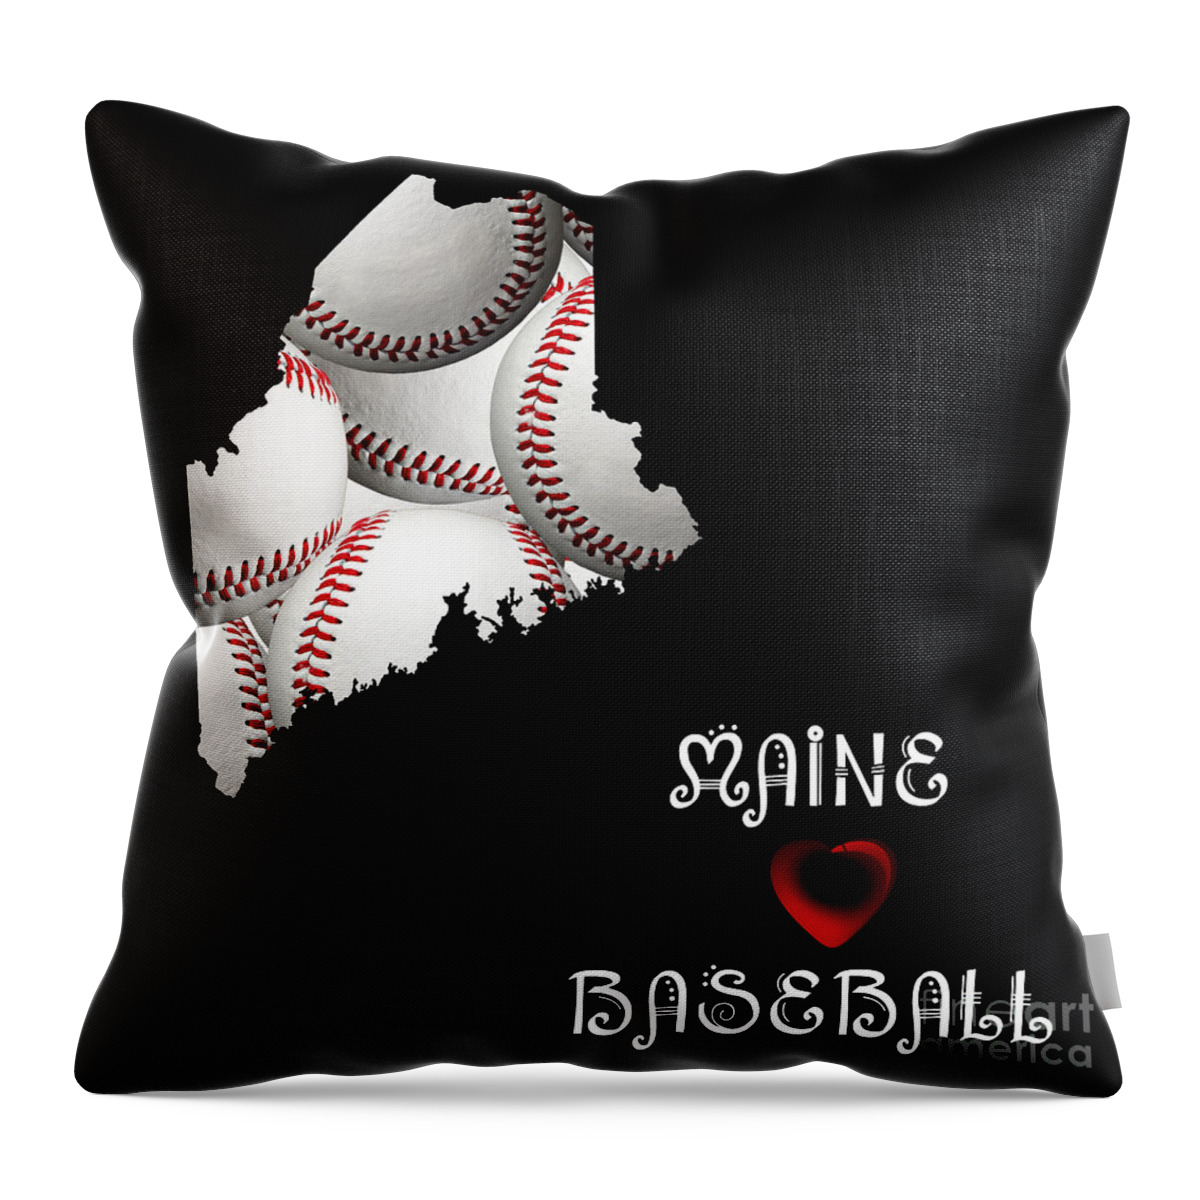 Andee Design Throw Pillow featuring the digital art Maine Loves Baseball by Andee Design